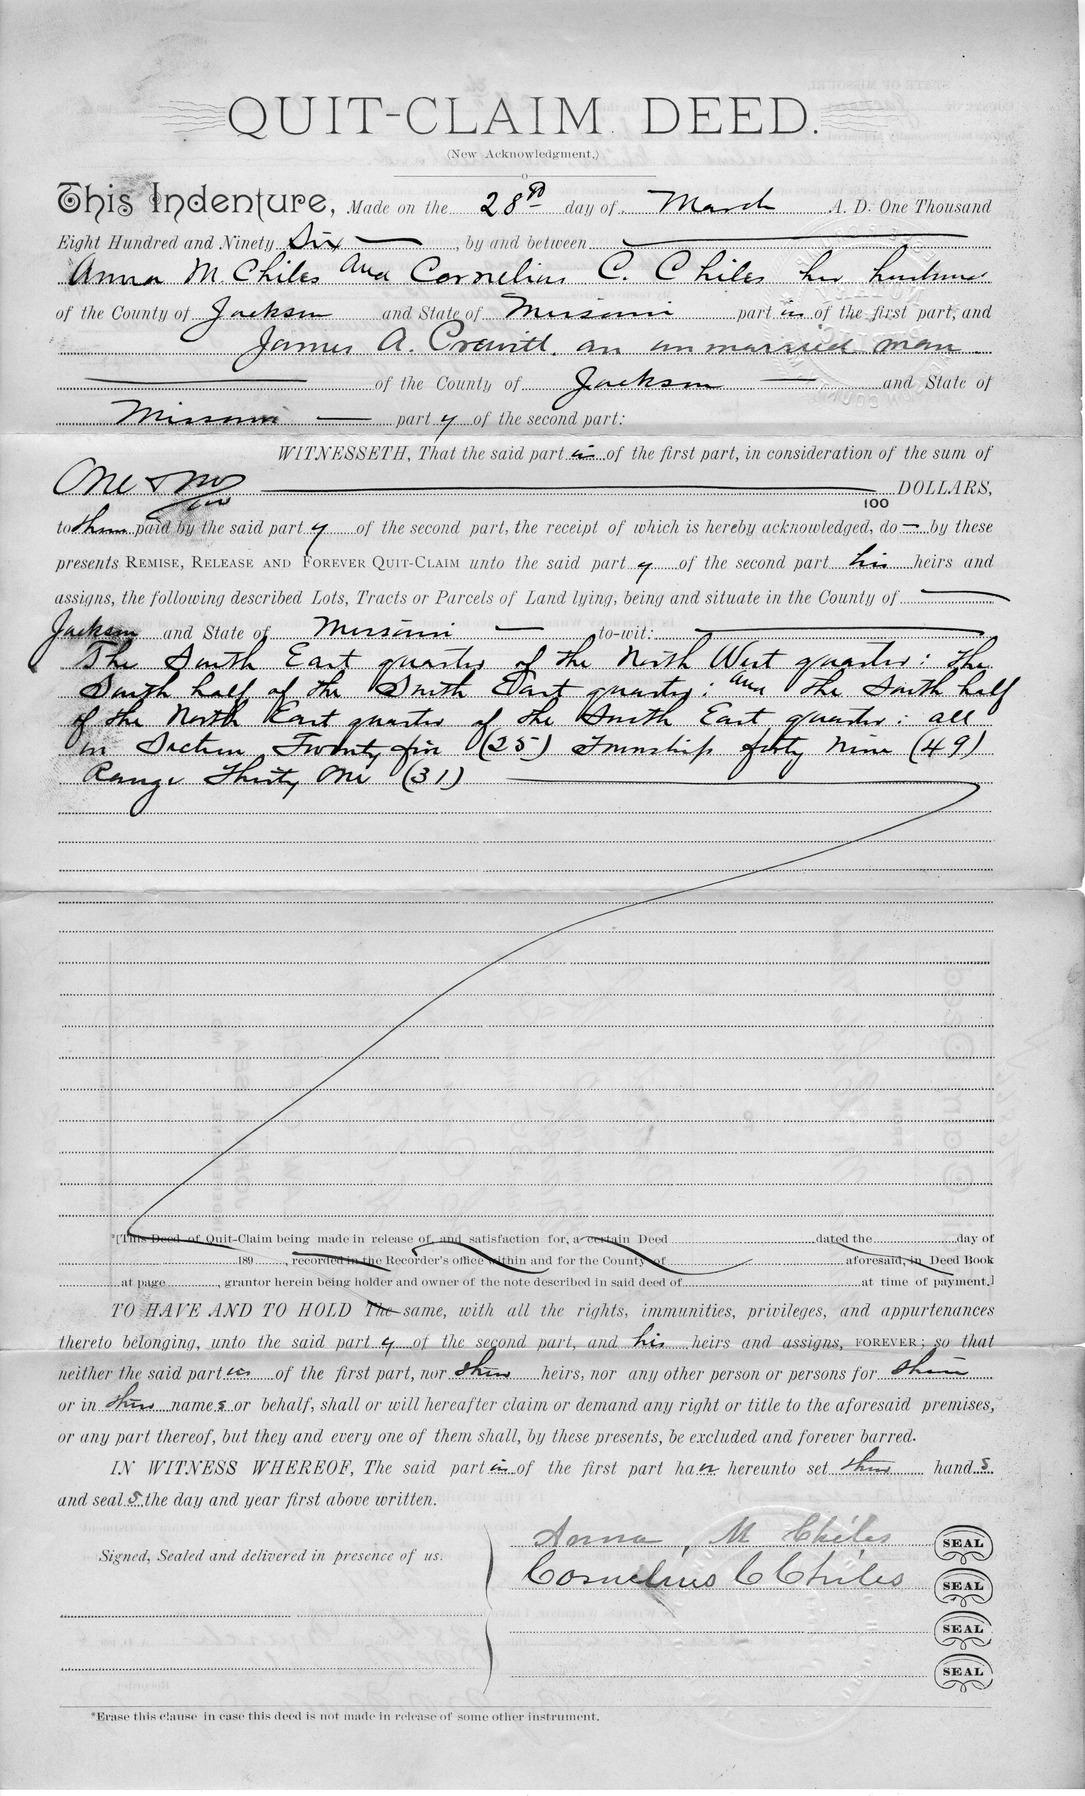 Quit-Claim Deed from Anna M. Chiles and Cornelius C. Chiles to James A. Powett